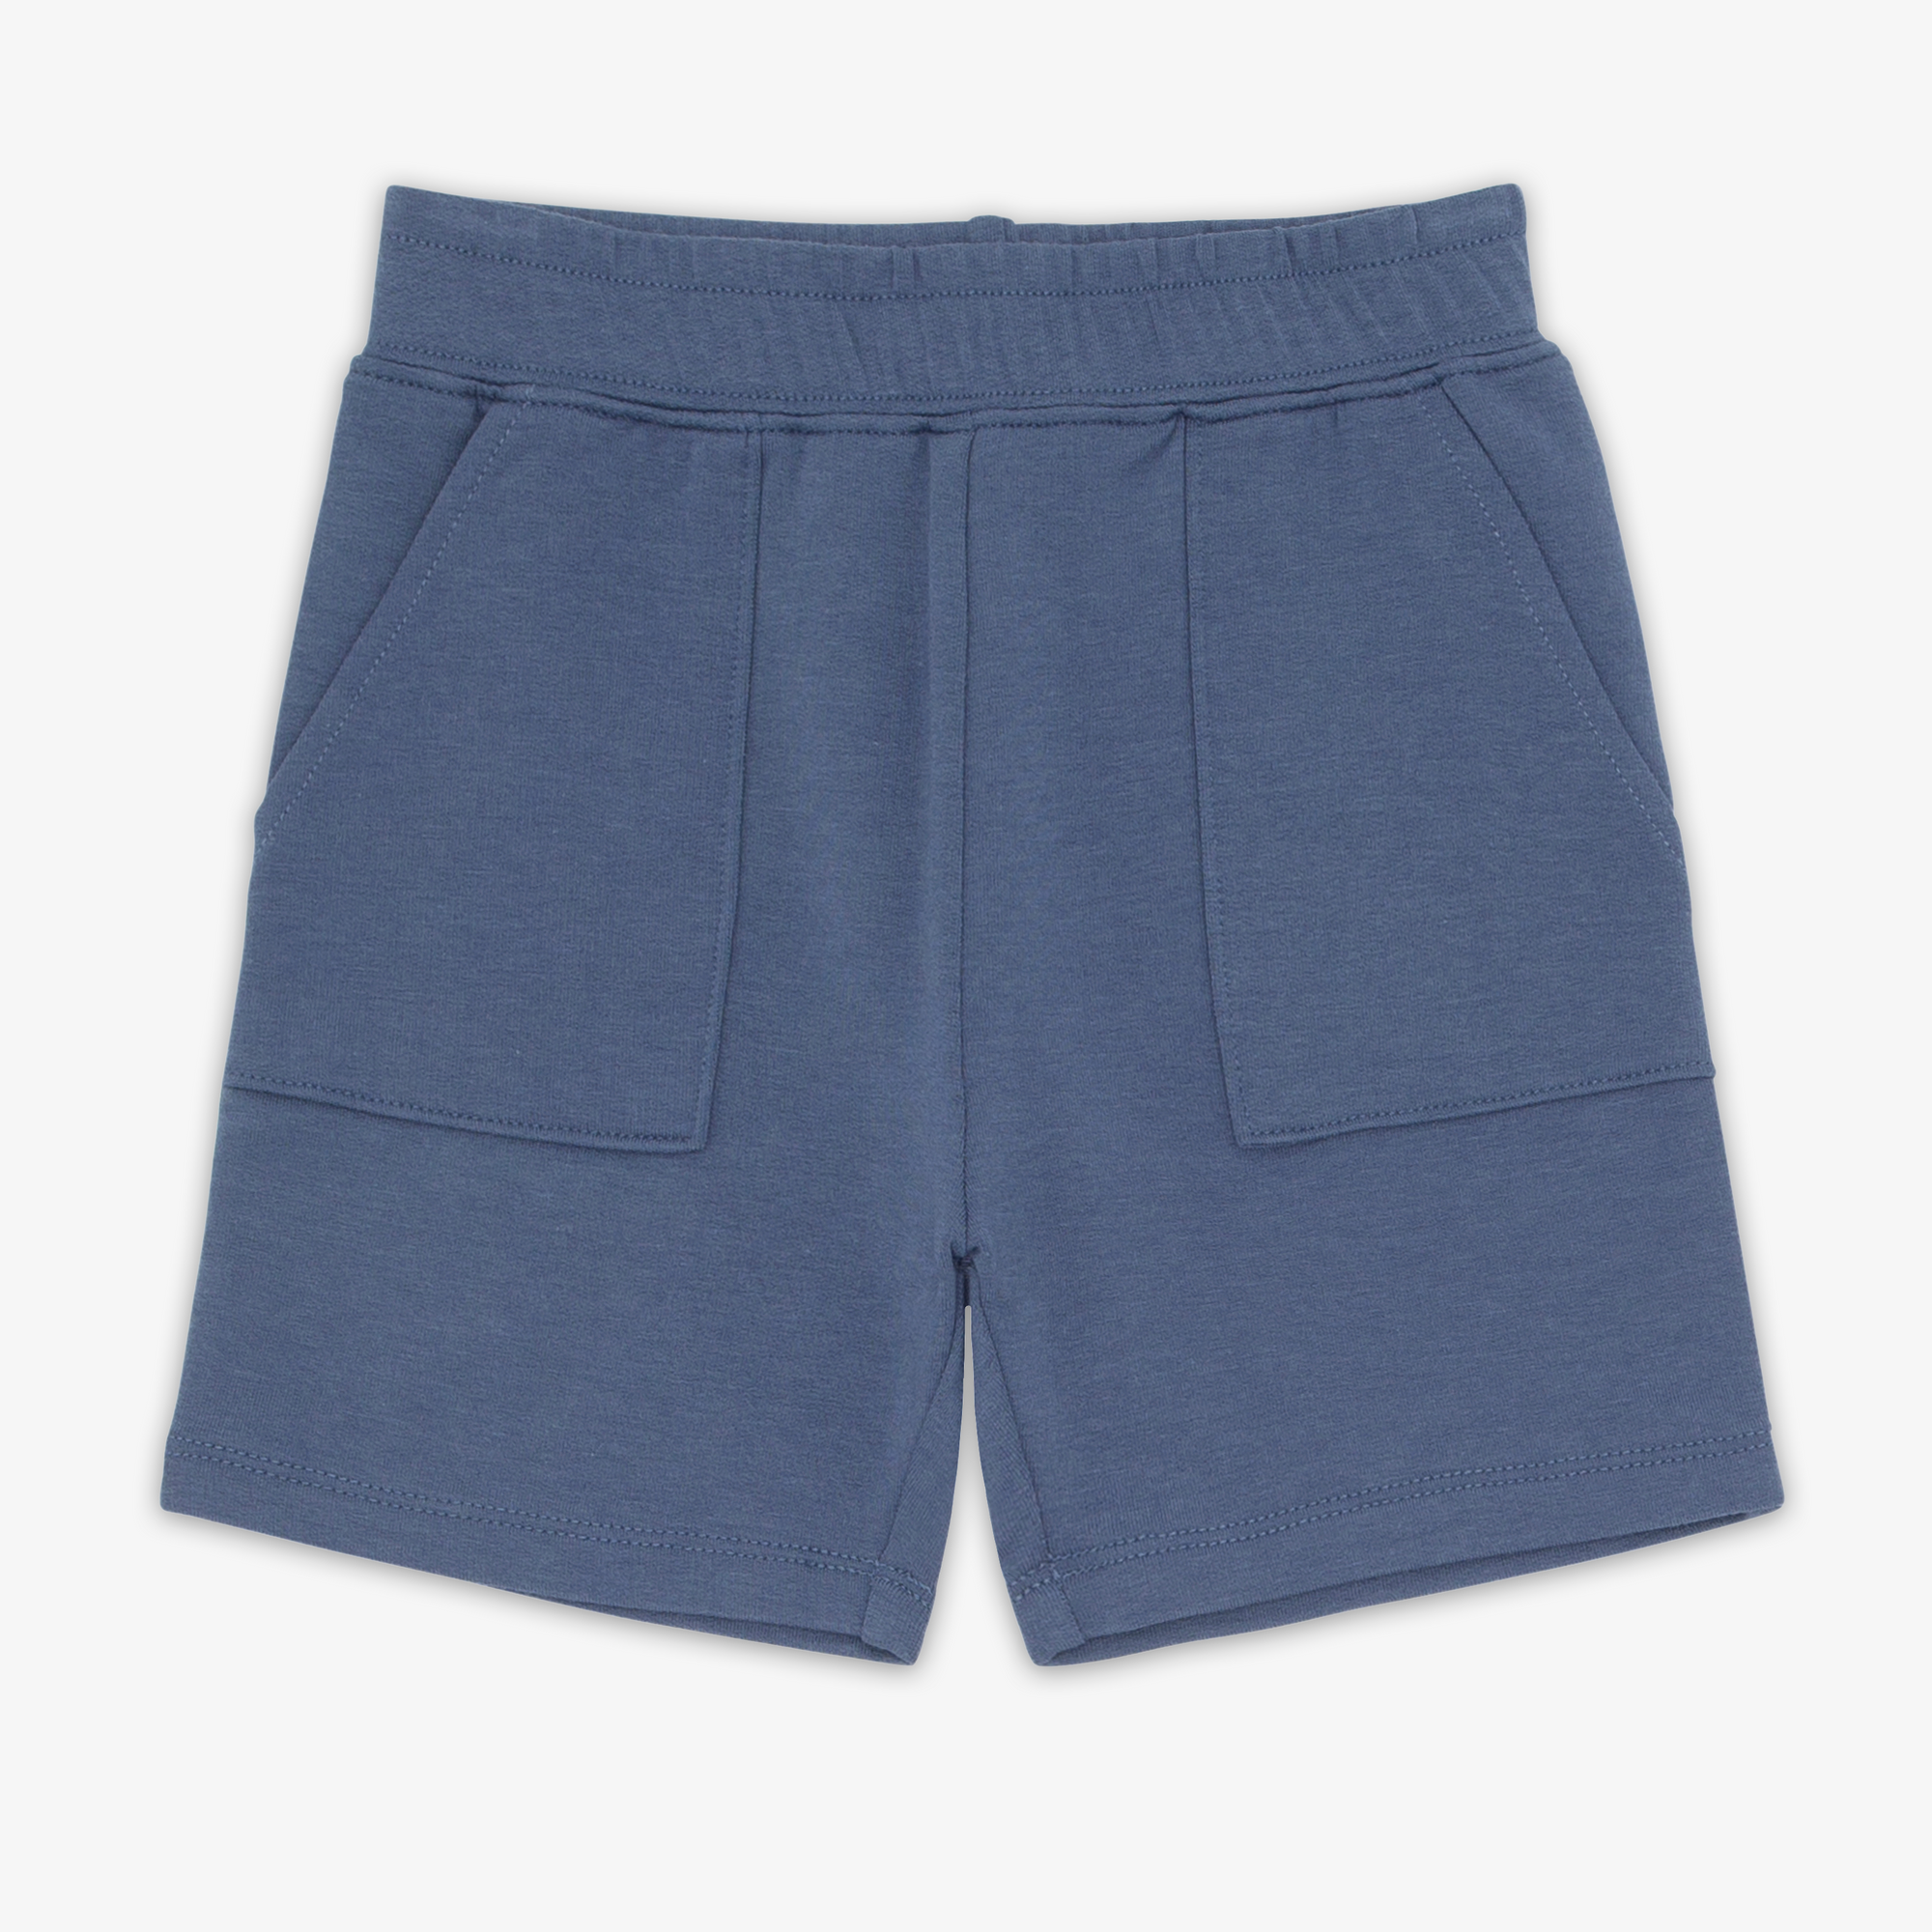 Flat lay image of the Vintage Navy Shorts